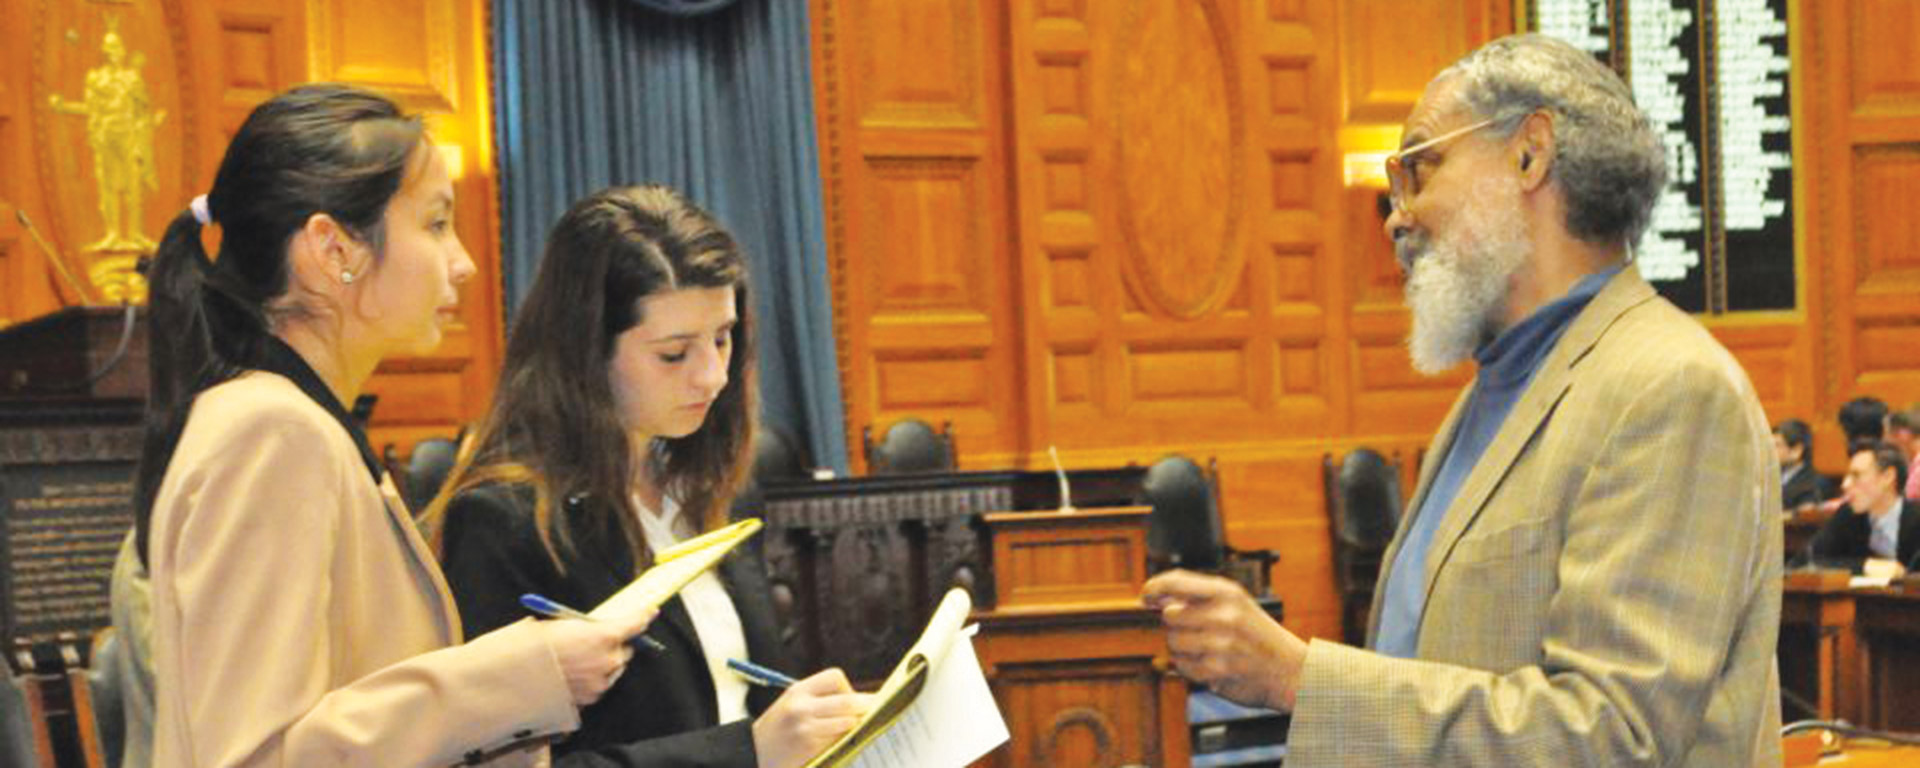 legislator speaks with two female students in state house